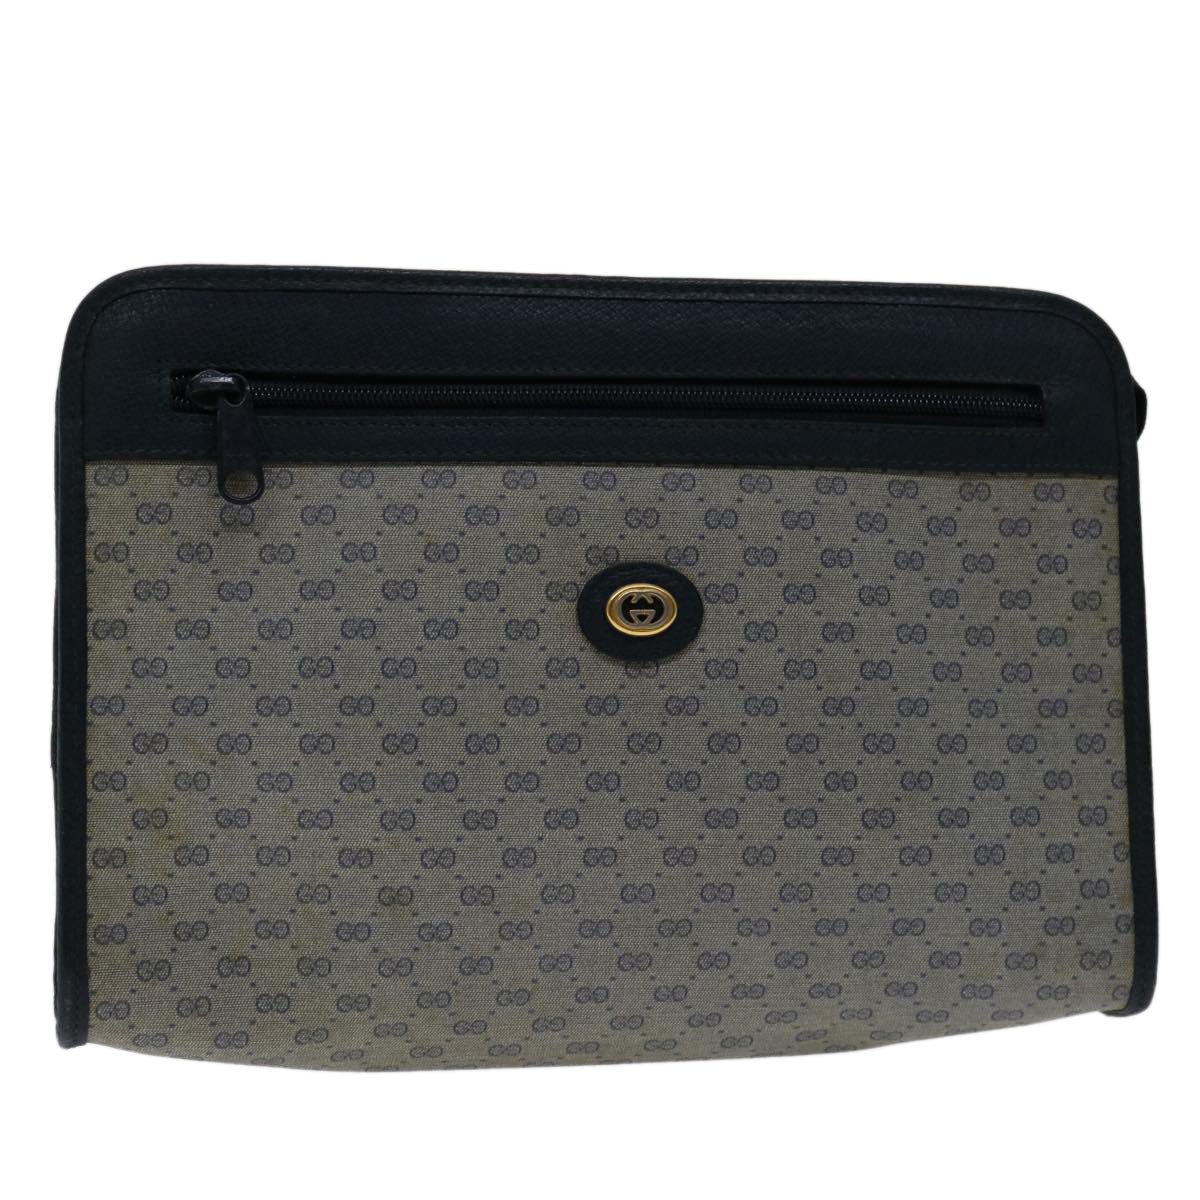 GUCCI Micro GG Supreme Clutch Bag PVC Leather Navy 97 01 037 Auth bs12751